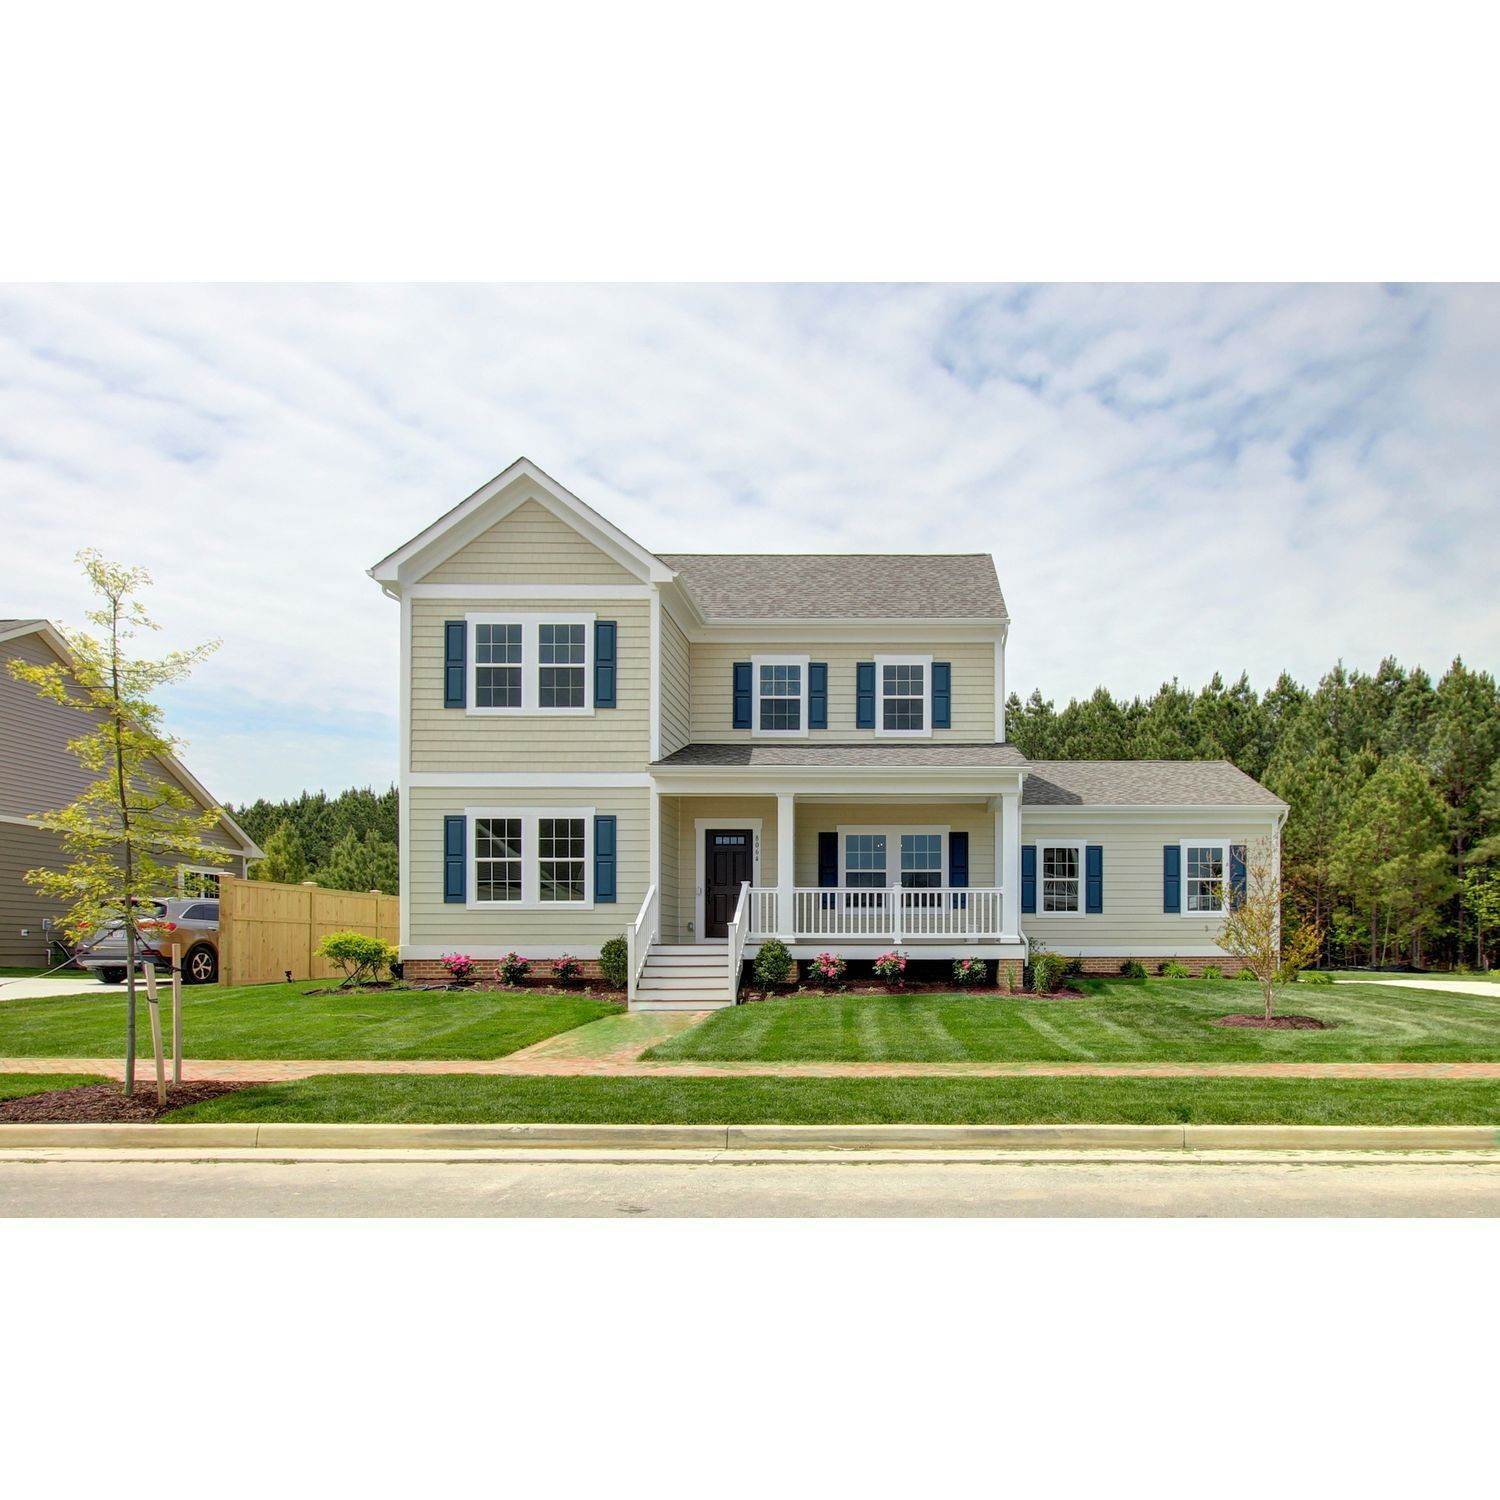 4. Covell Signature Homes building at 110 Channel Marker Way, Grasonville, MD 21638